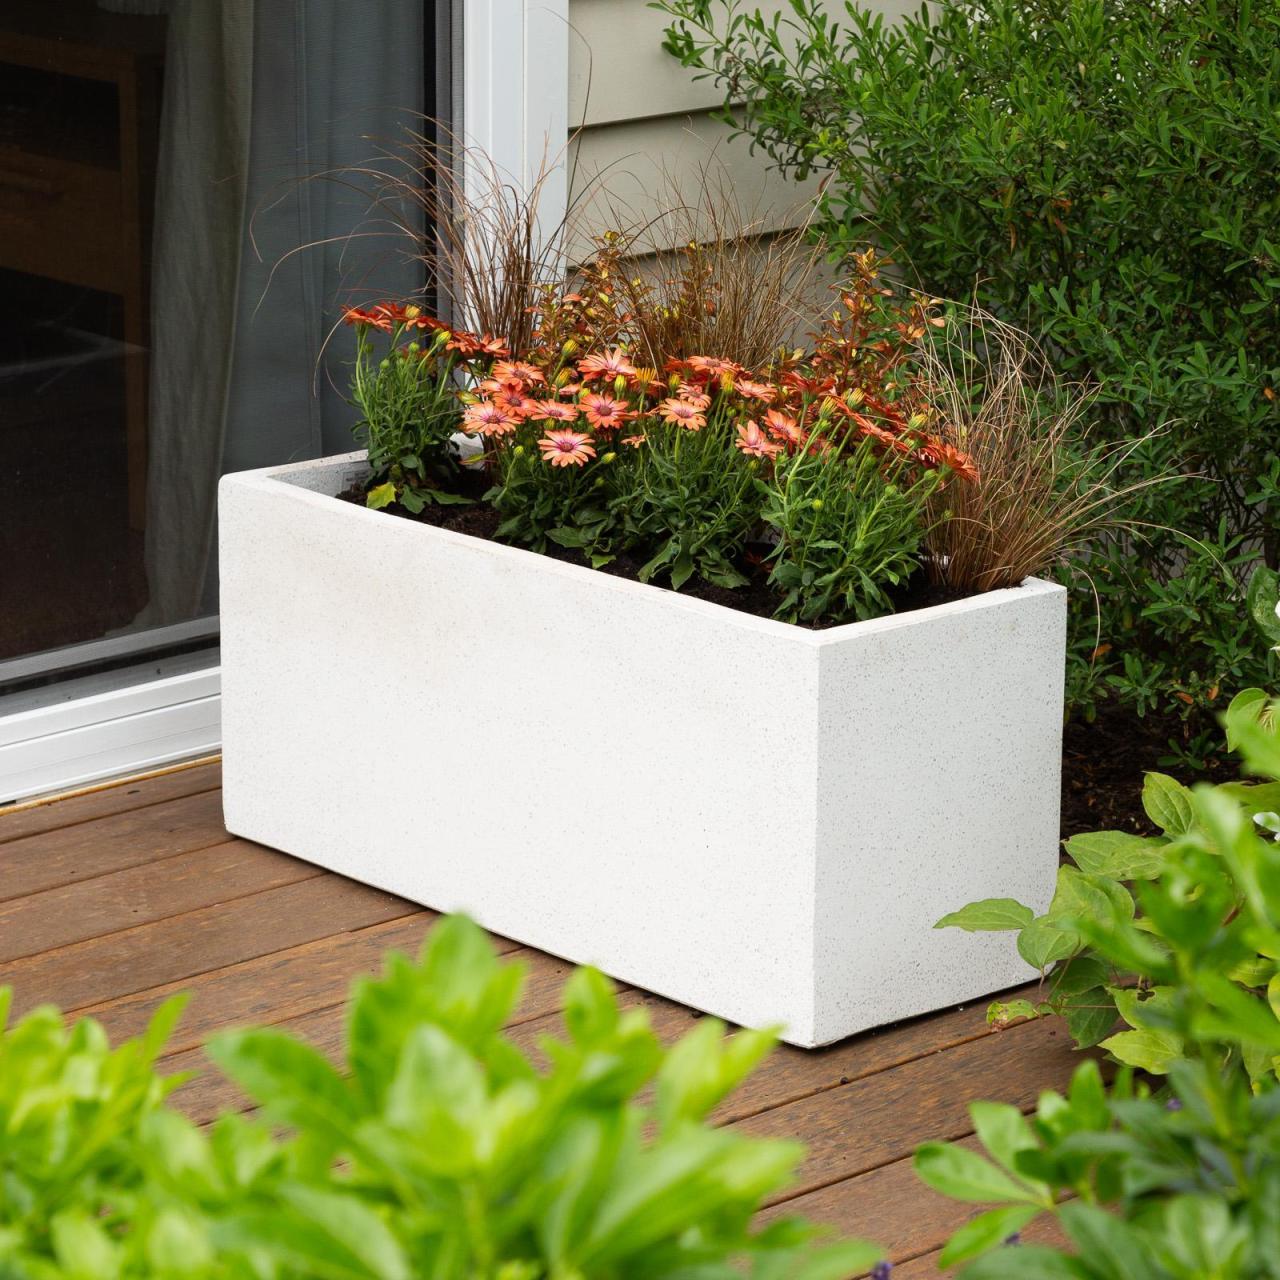 Hanging Plants Indoor | Discover Bunnings Garden Troughs: The Perfect Addition to Your Outdoor Oasis